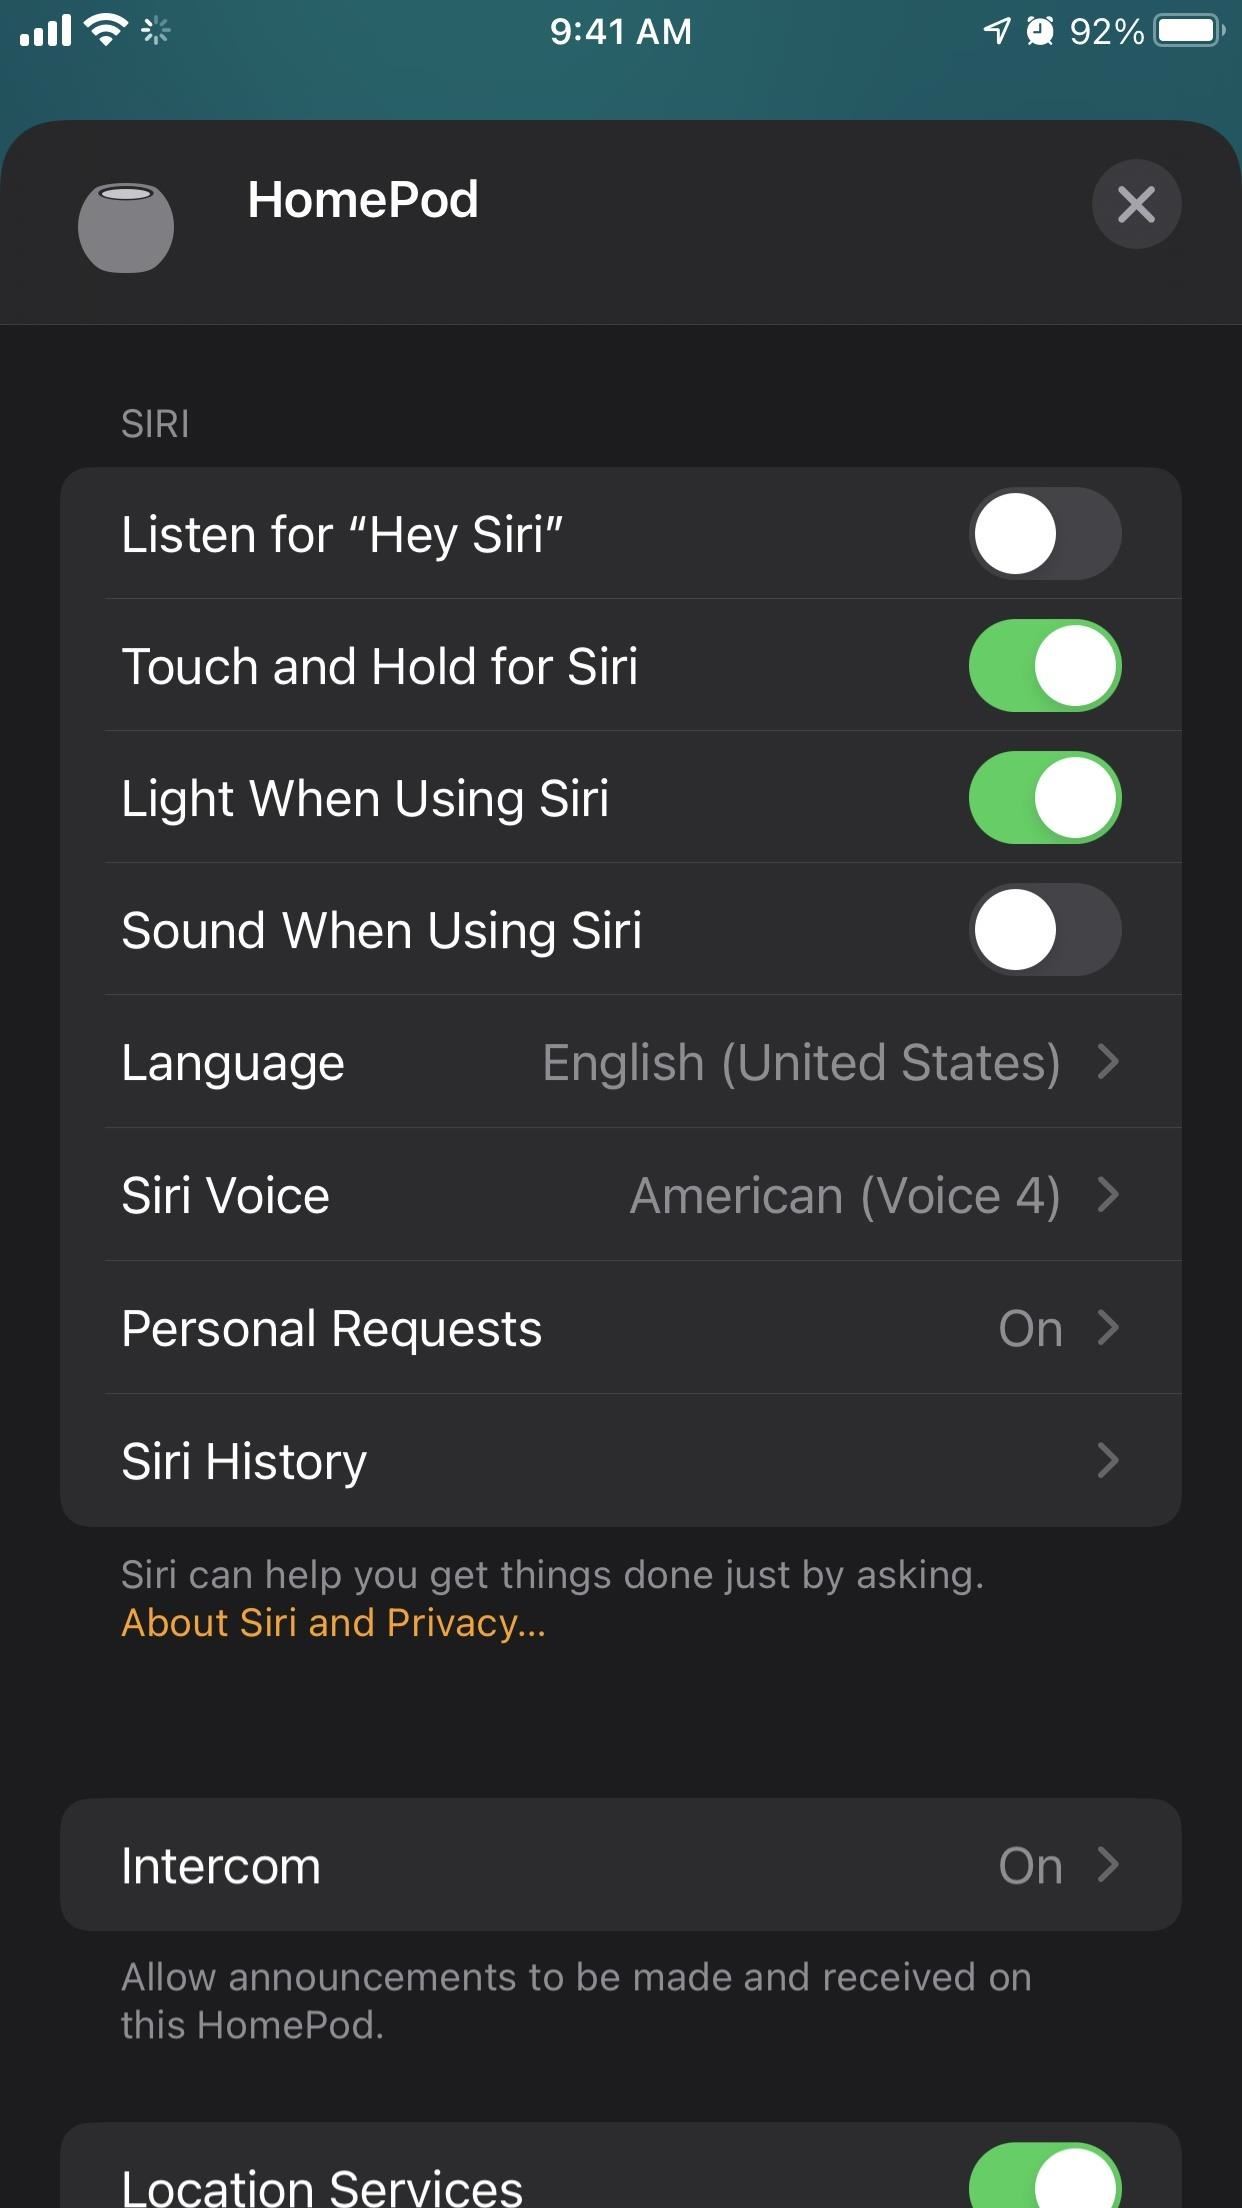 How to Stop Your HomePod from Spying on You